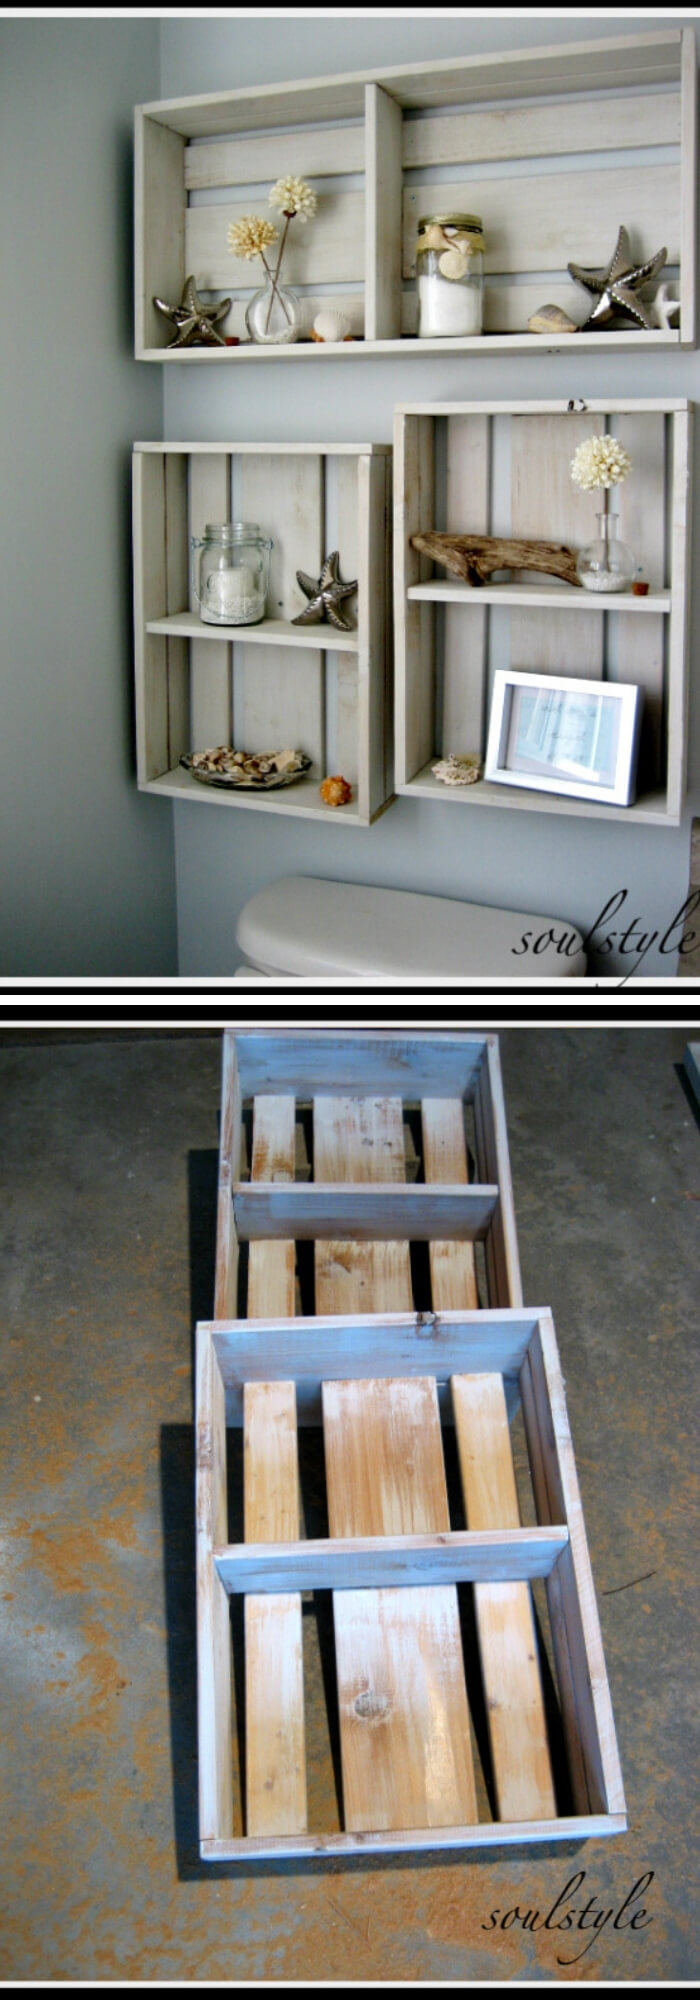 Repurposed Wood Crate | Best Over the Toilet Storage Ideas for Bathroom